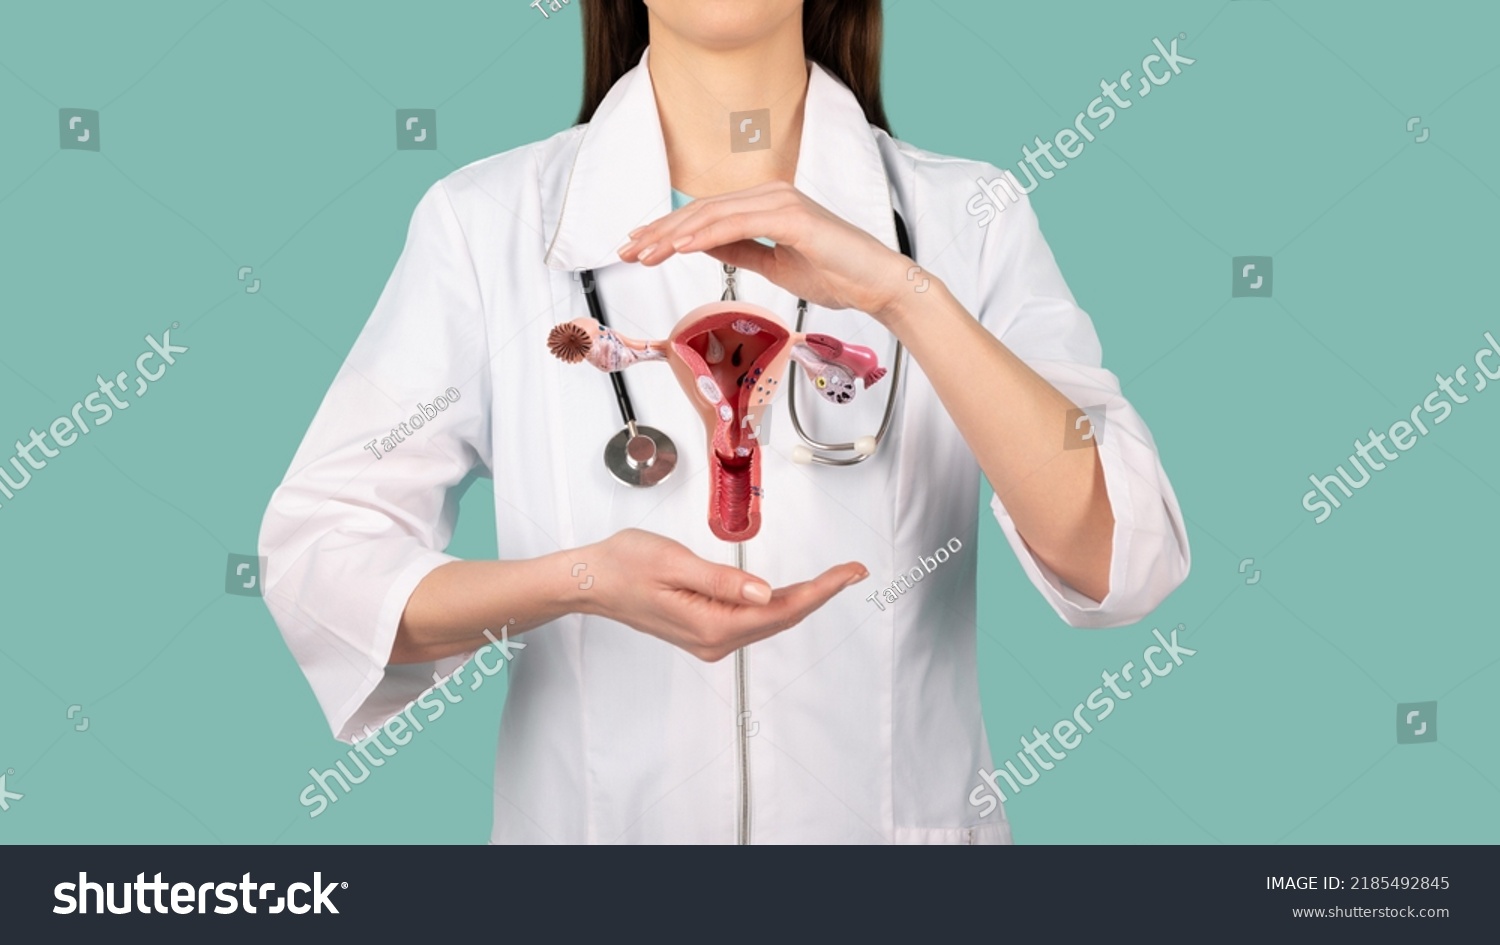 Female doctor Gynecologist with a stethoscope holds model of female reproductive system in the hands. Help and care concept #2185492845